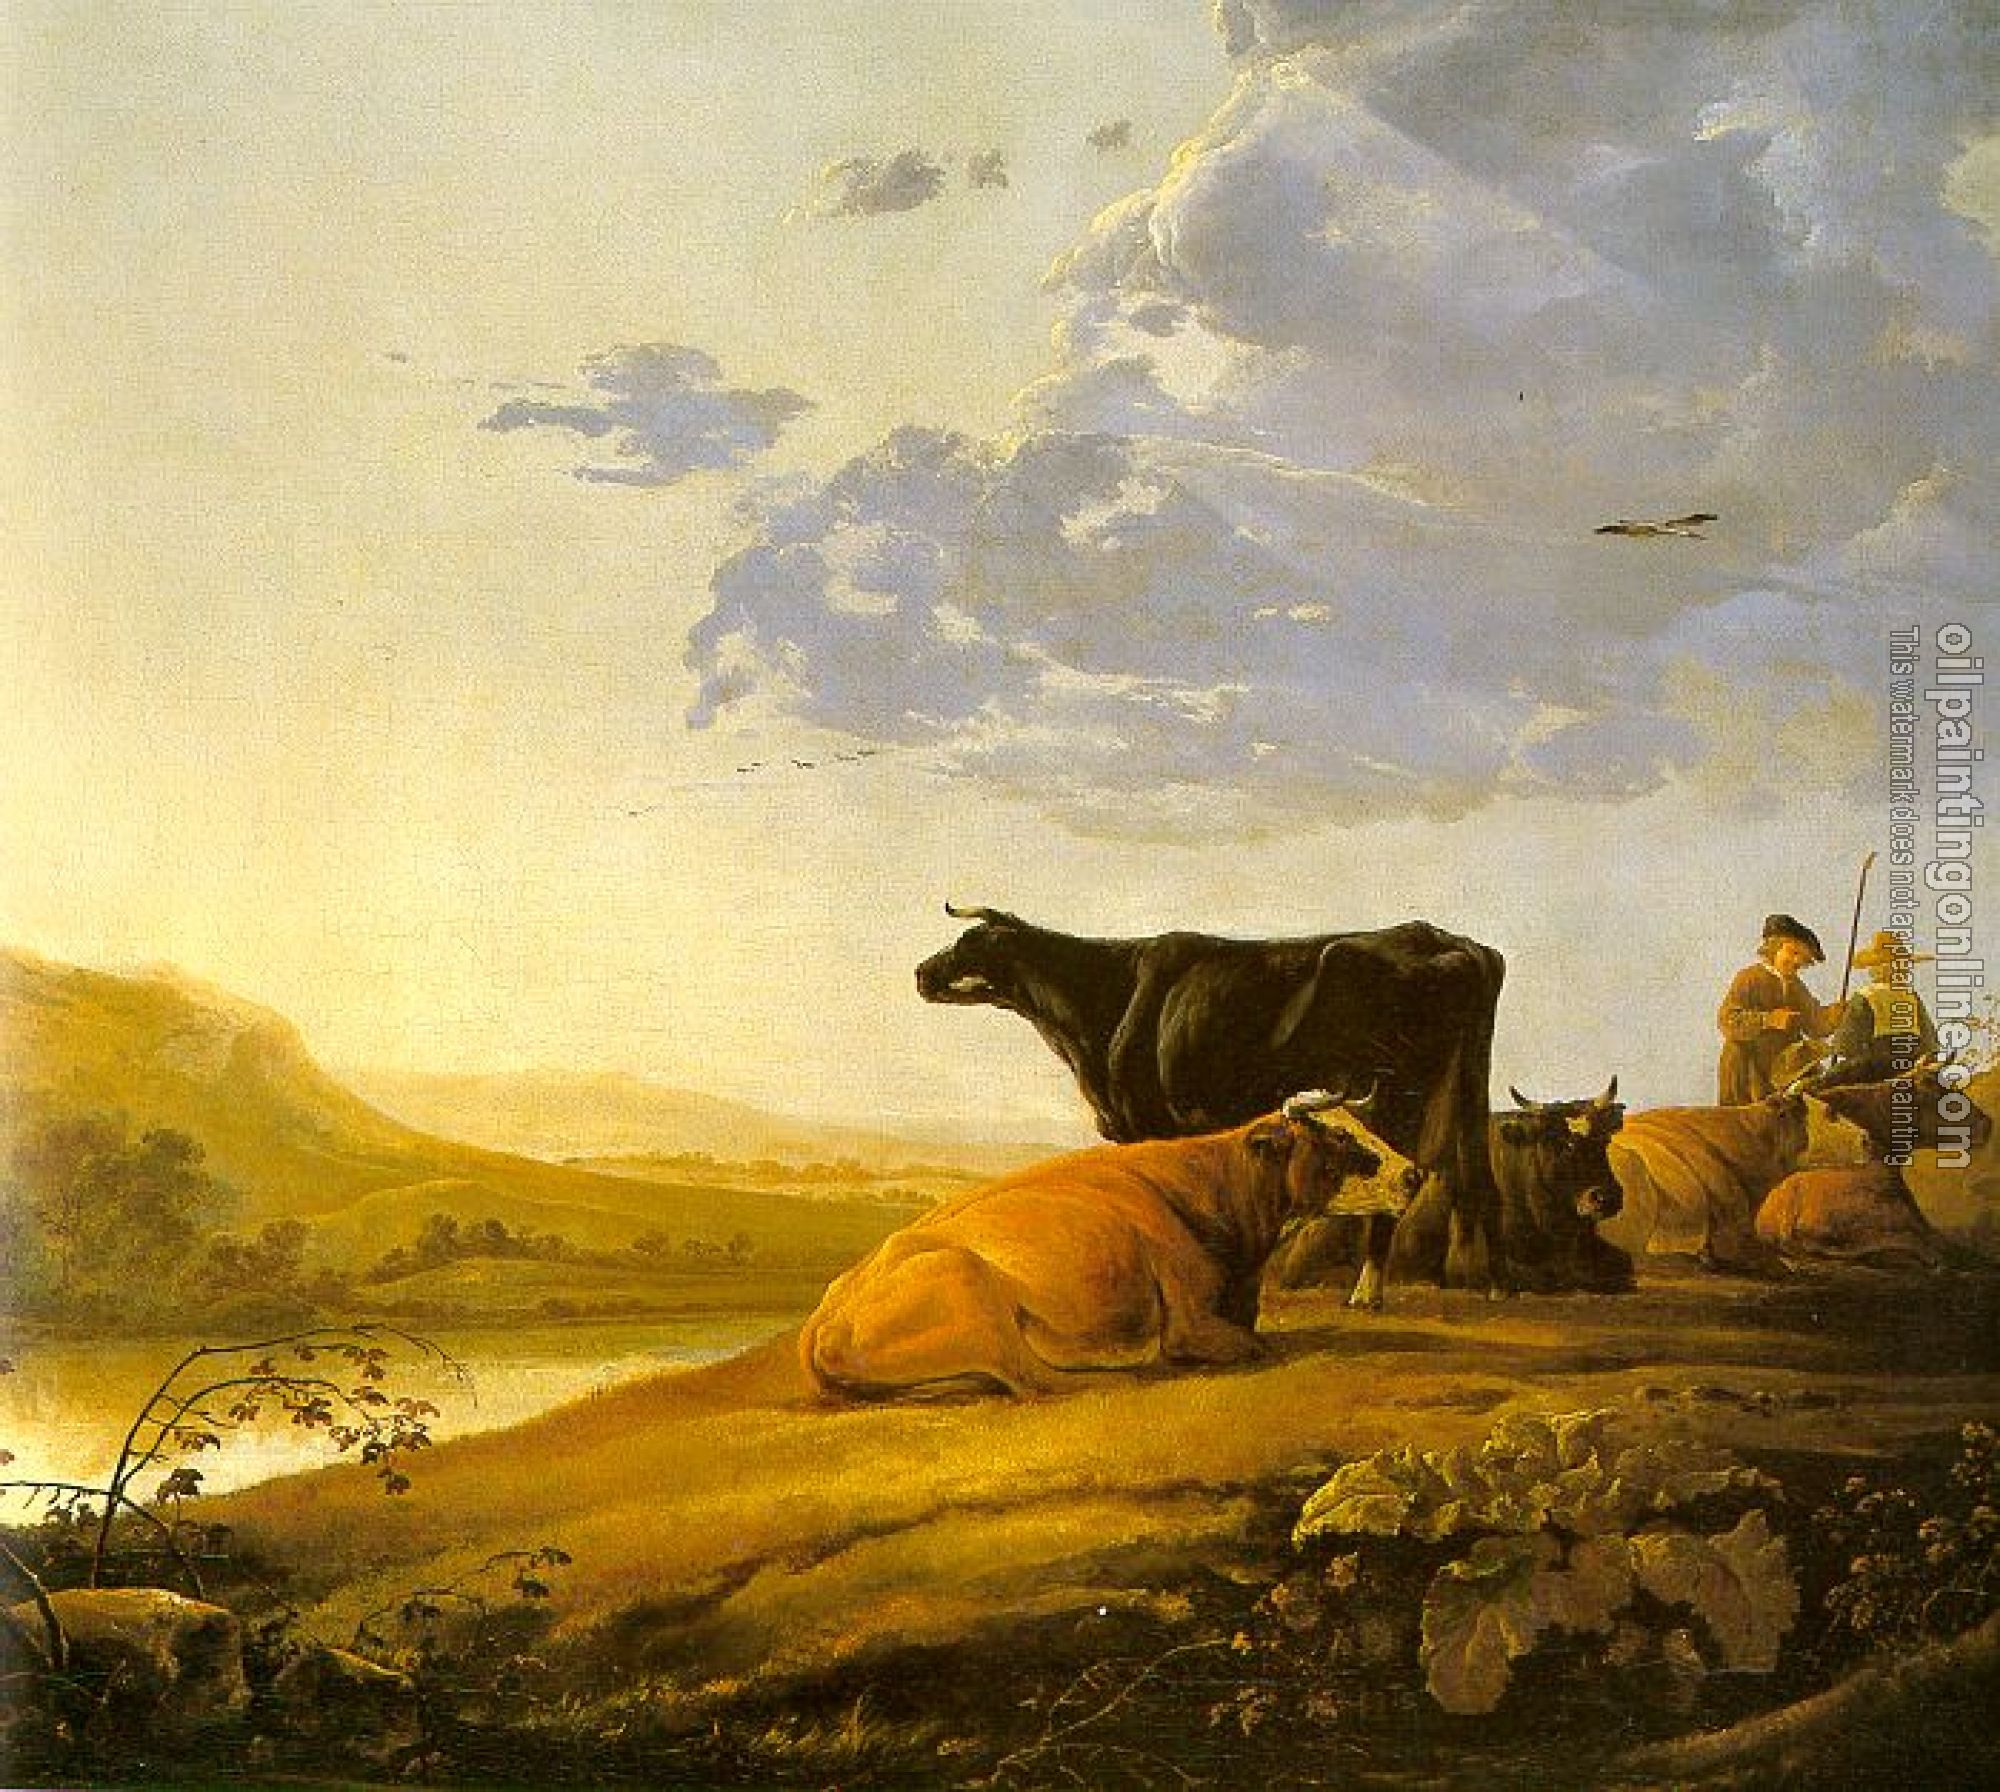 Aelbert Cuyp - Young Herdsman With Cows